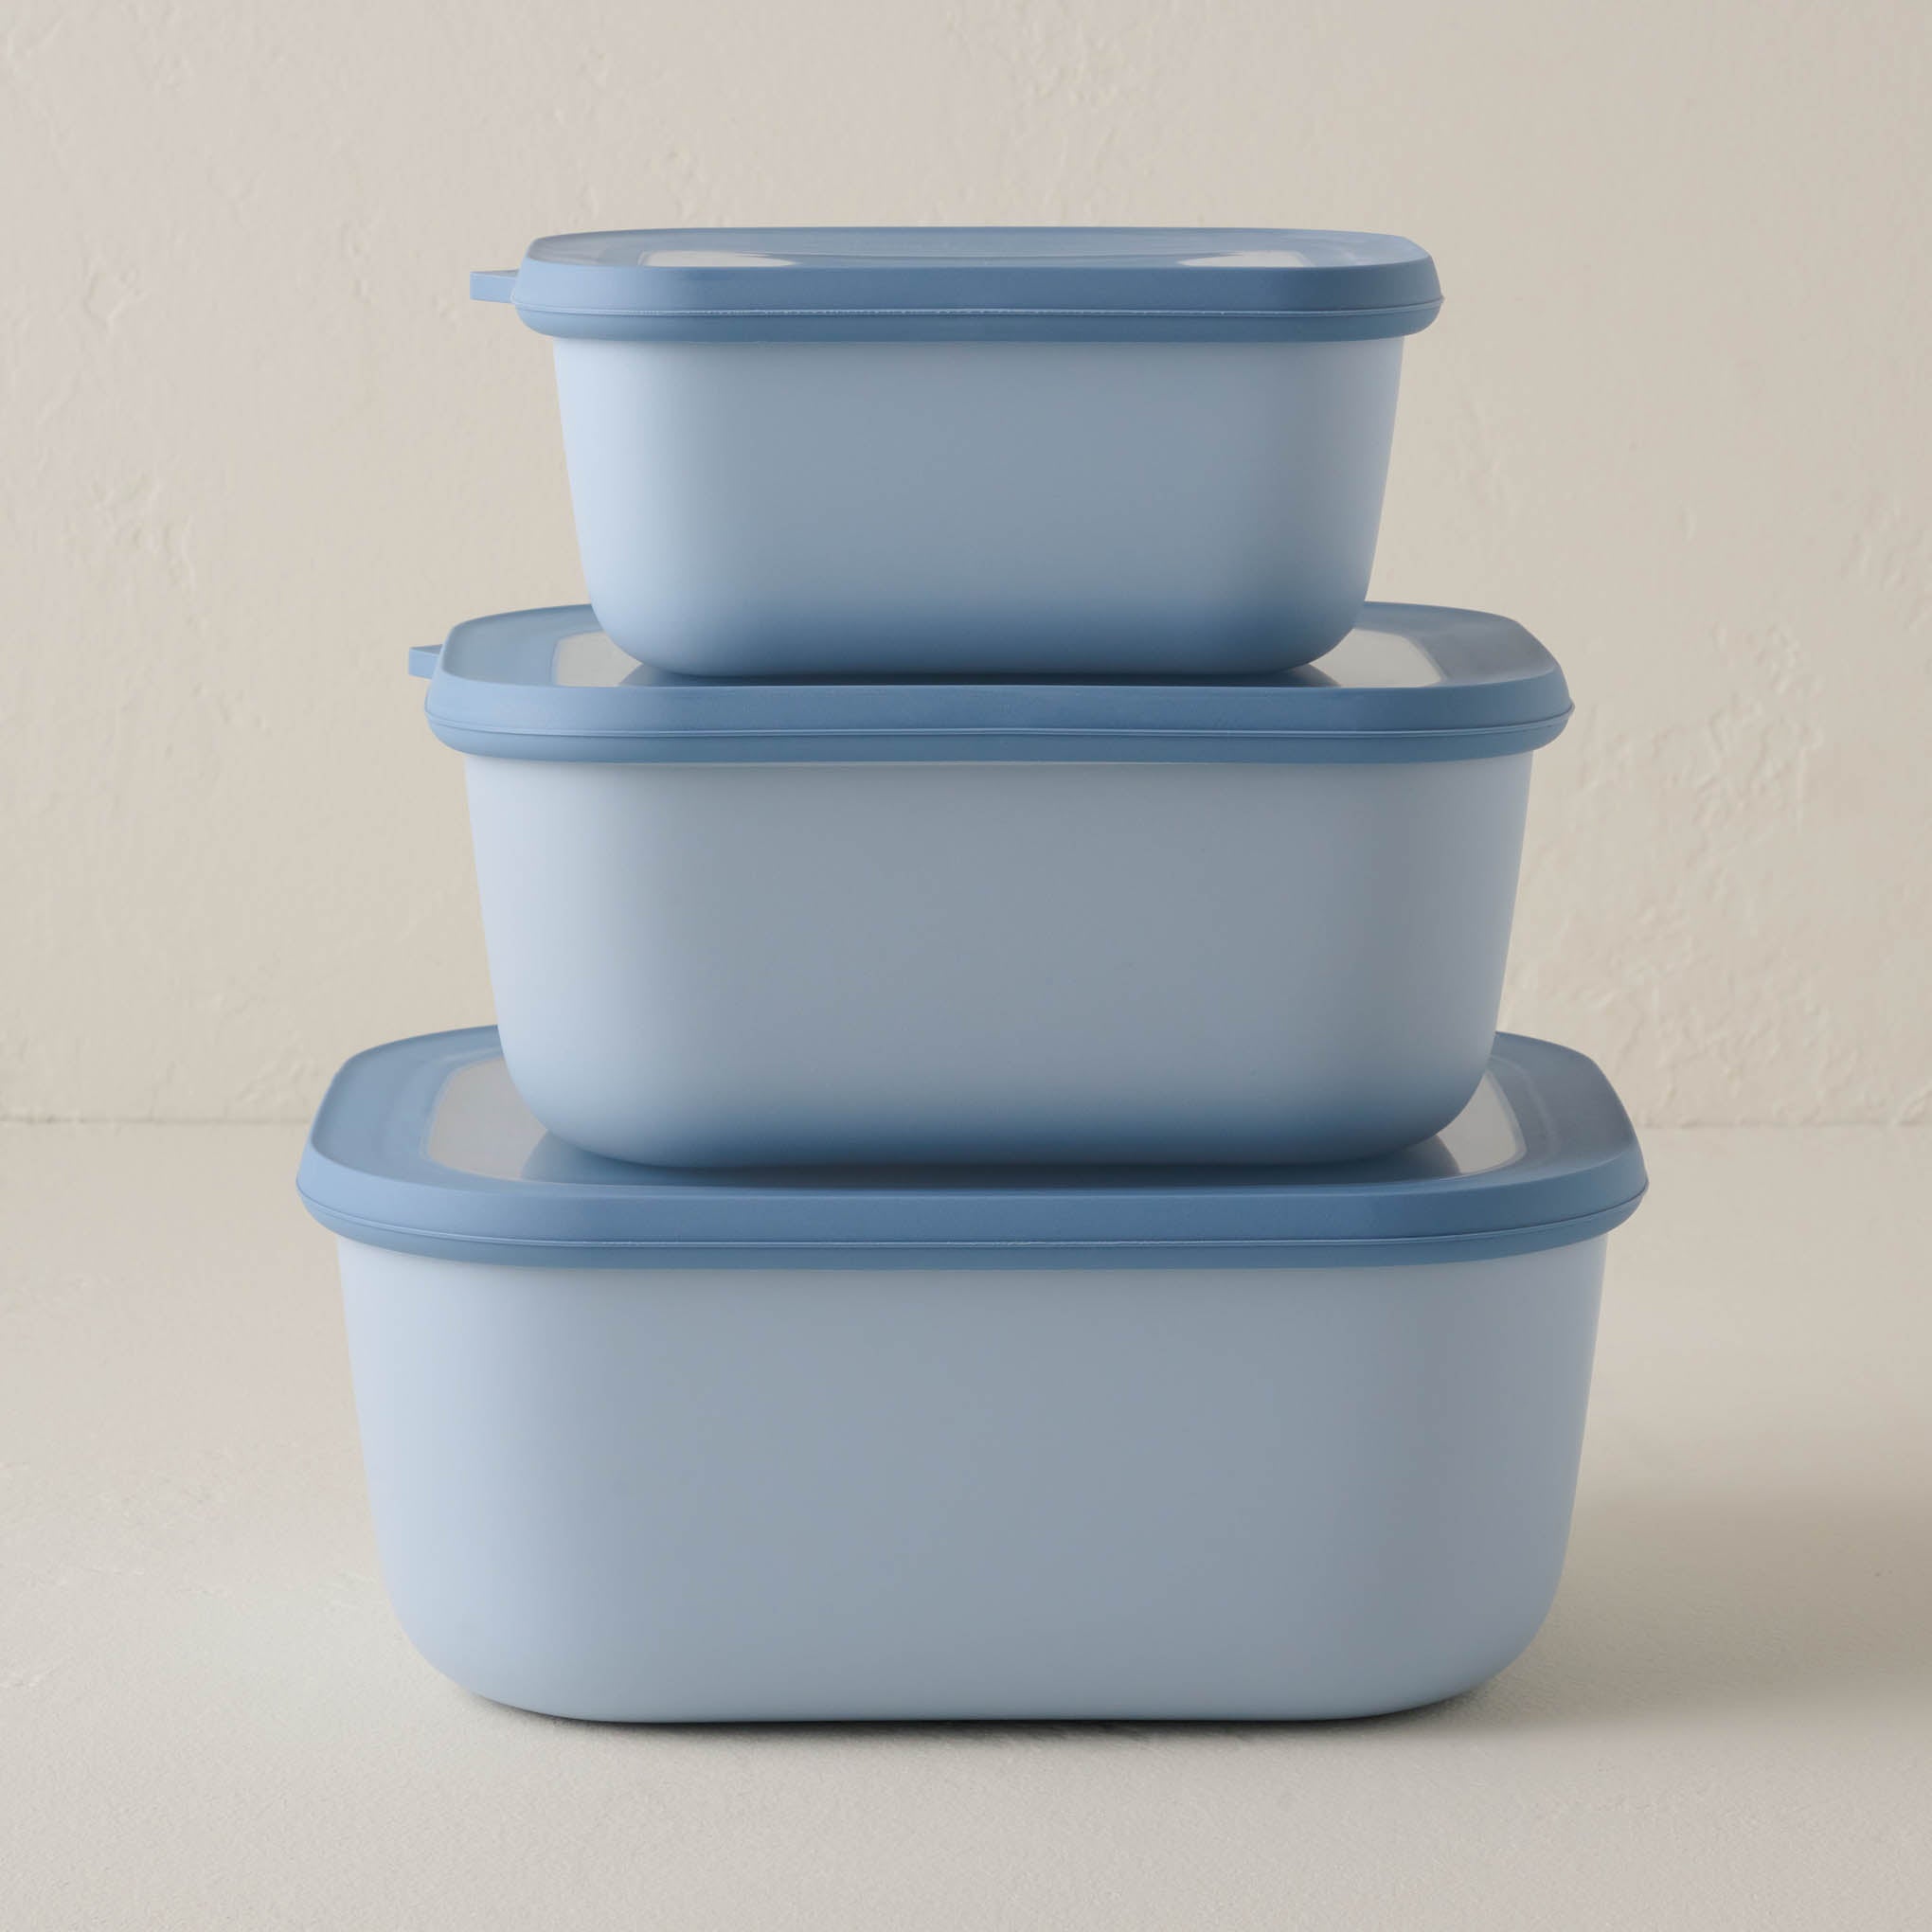 Stacked set of three deep sized Nordic Blue Mepal Food Storage containers